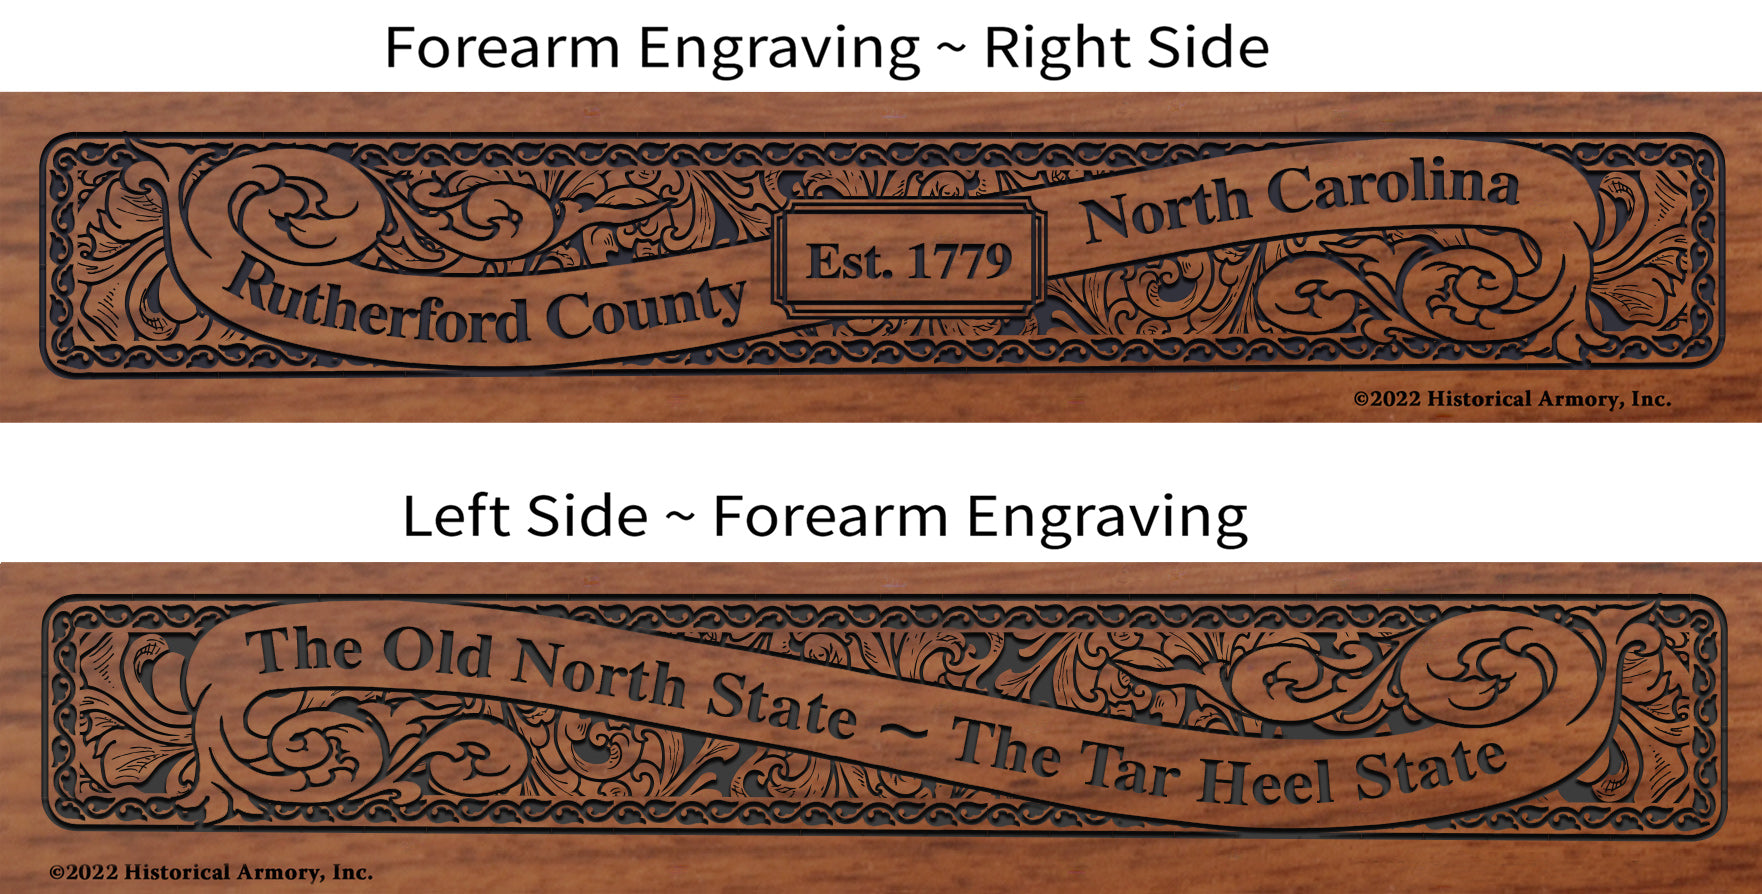 Rutherford County North Carolina Engraved Rifle Forearm